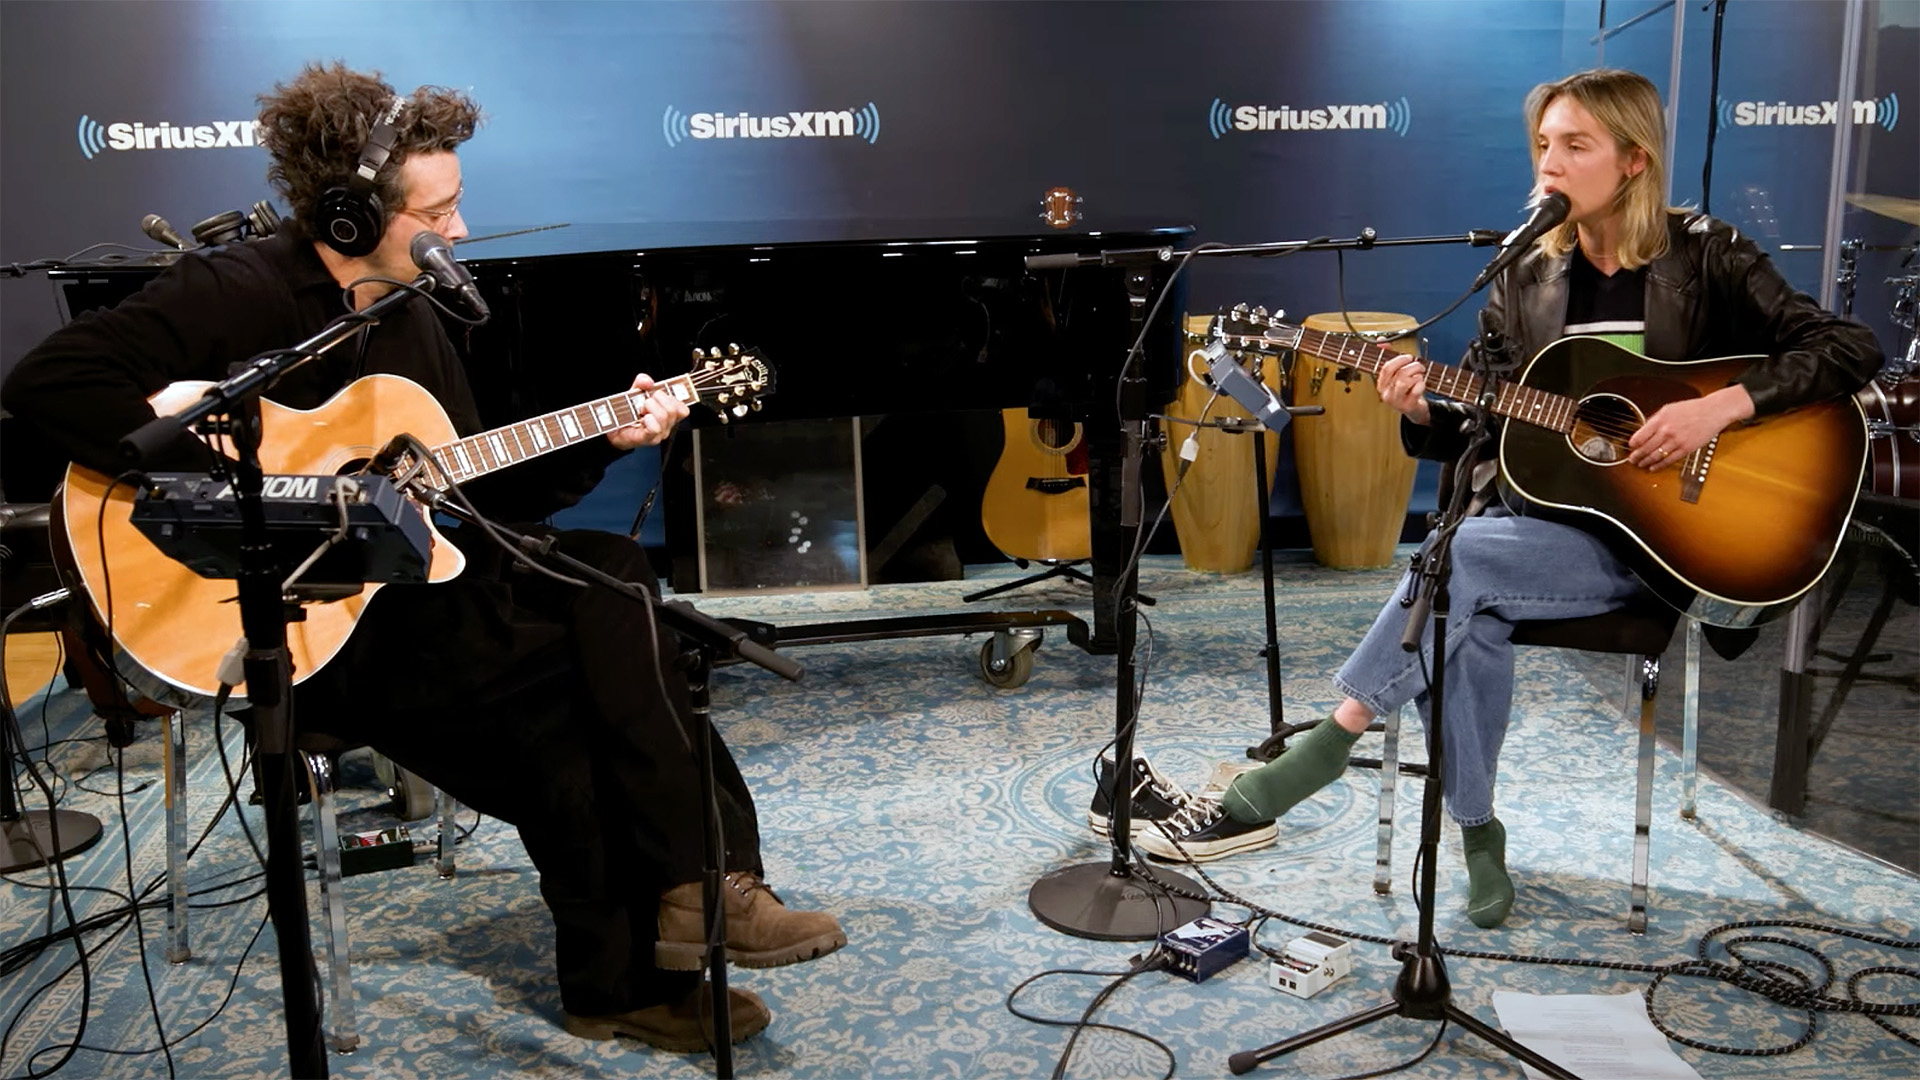 The Japanese House and Matty Healy perform live for The Coffee House on SiriusXM 2023